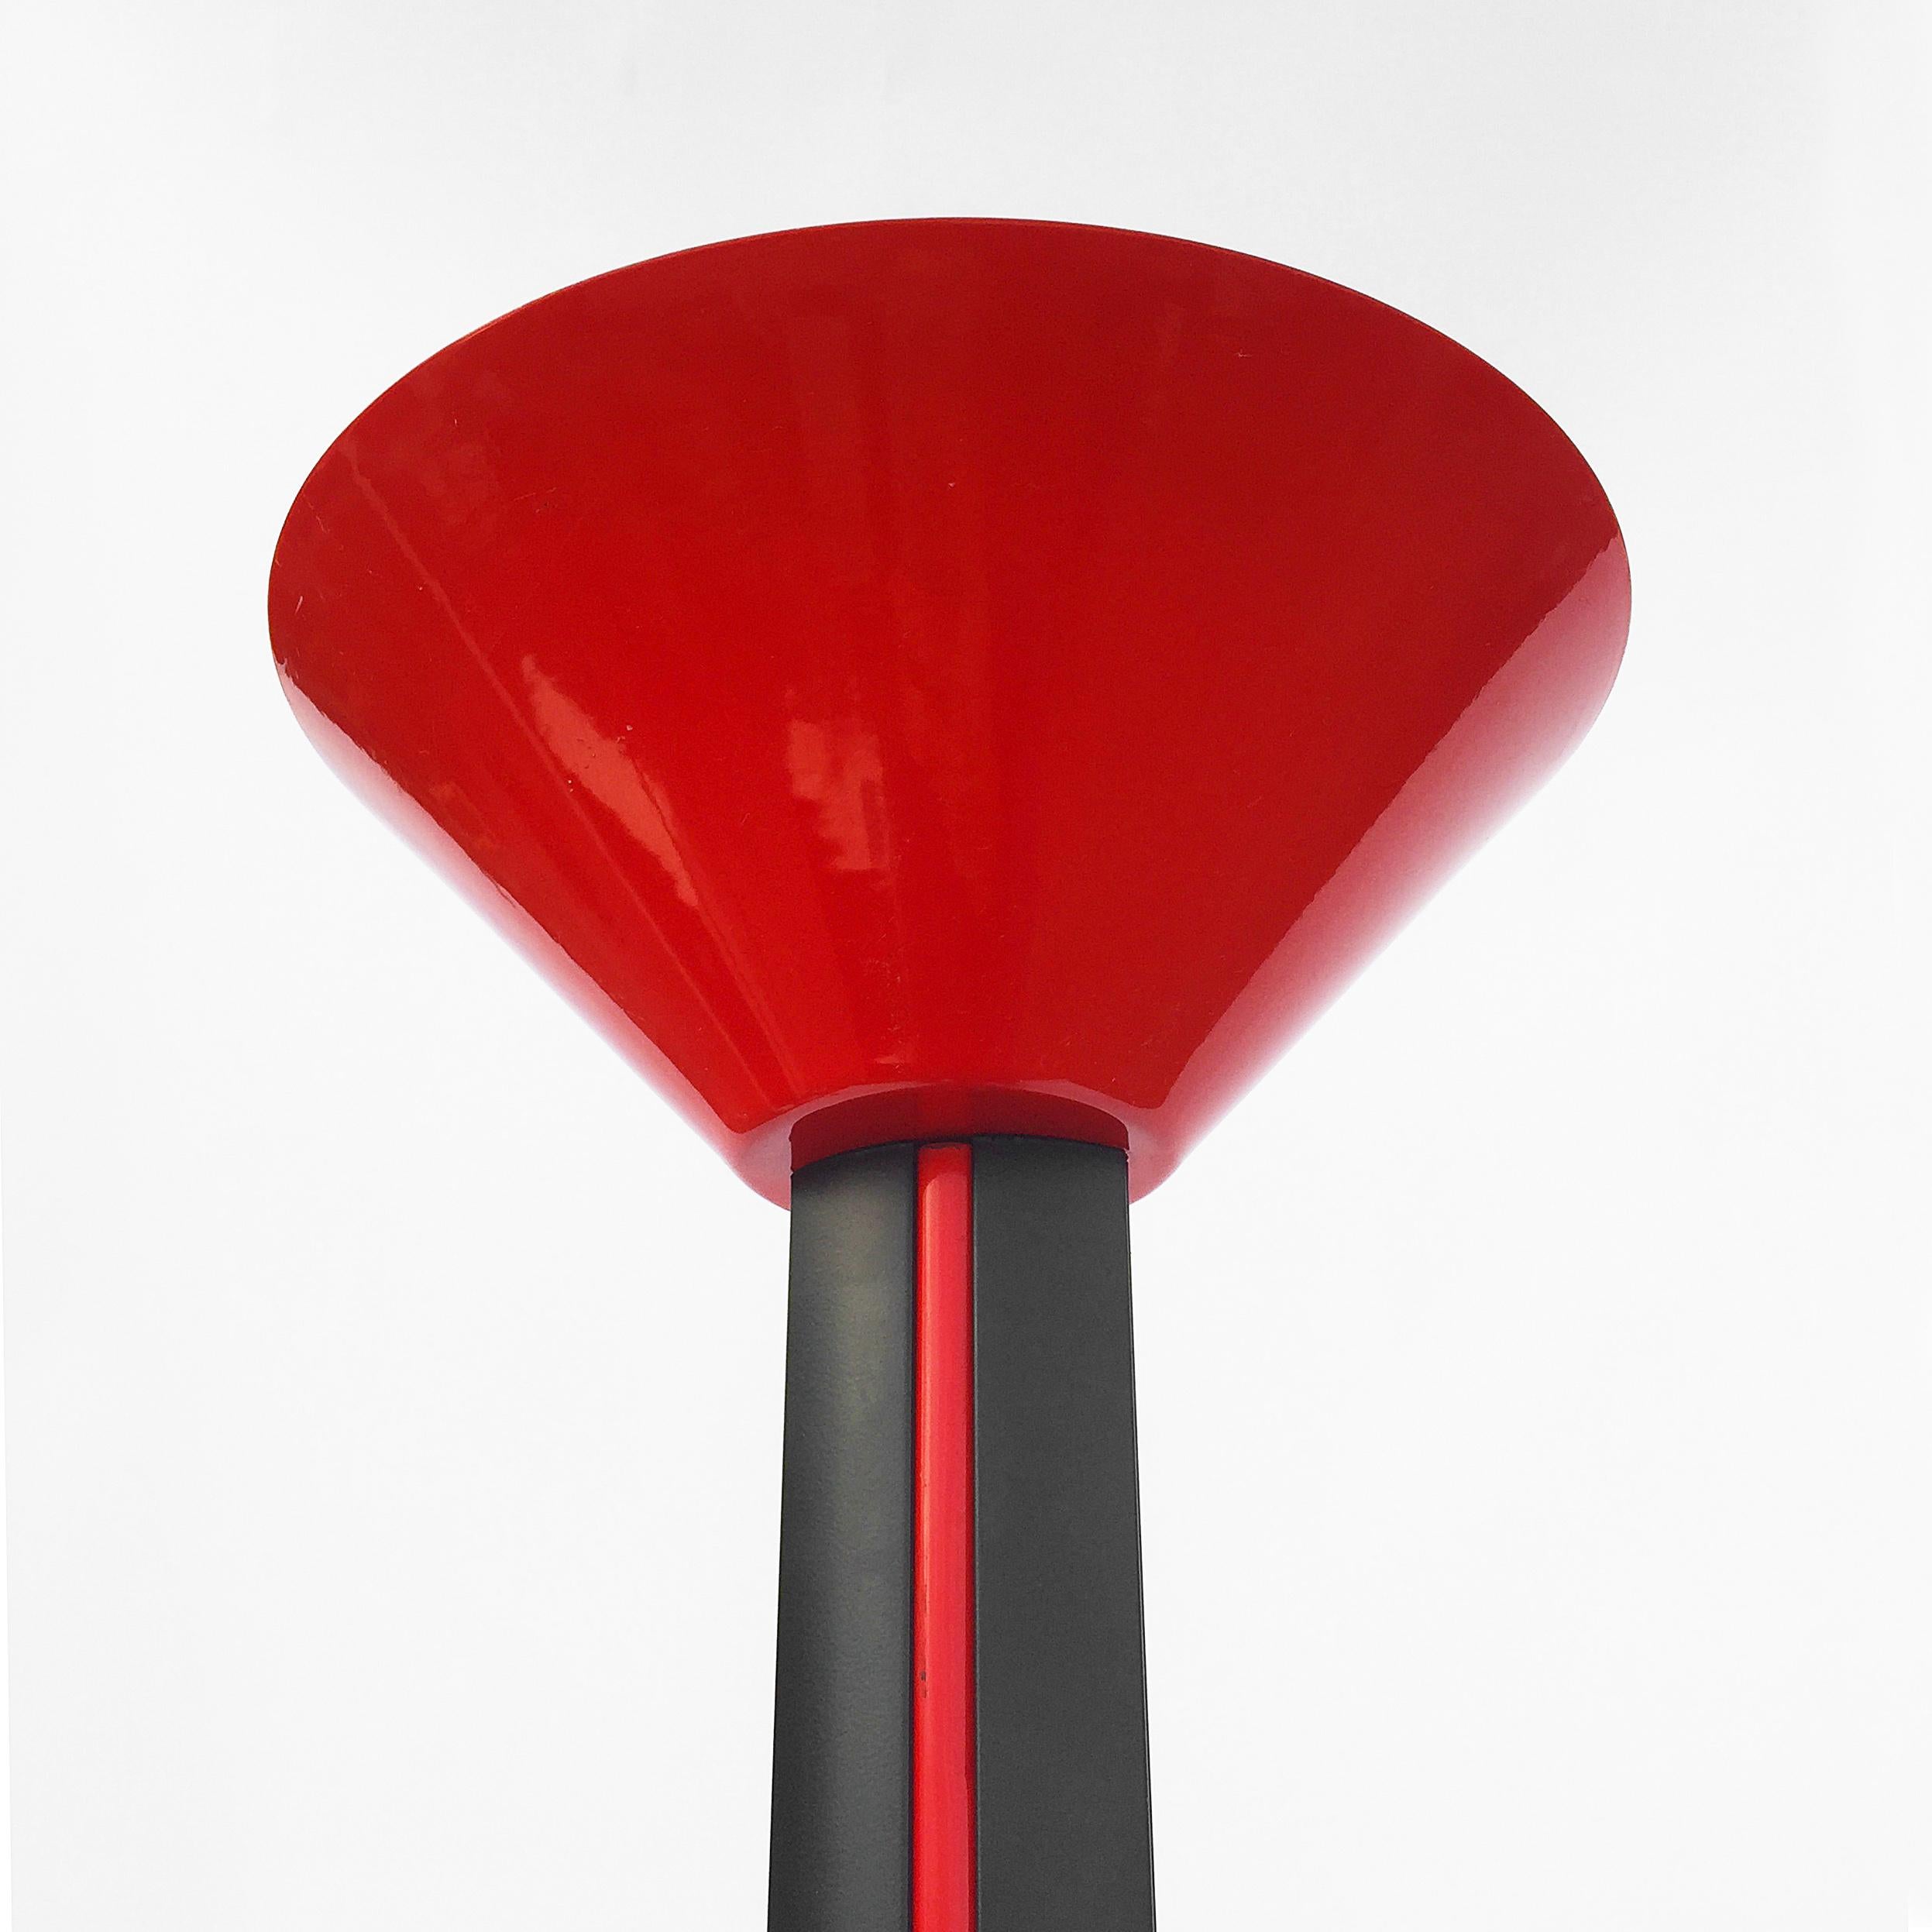 Powder-Coated Memphis Inspired Uplighters 1980s Floor Lamp Red Black Postmodern Sottsass Style For Sale